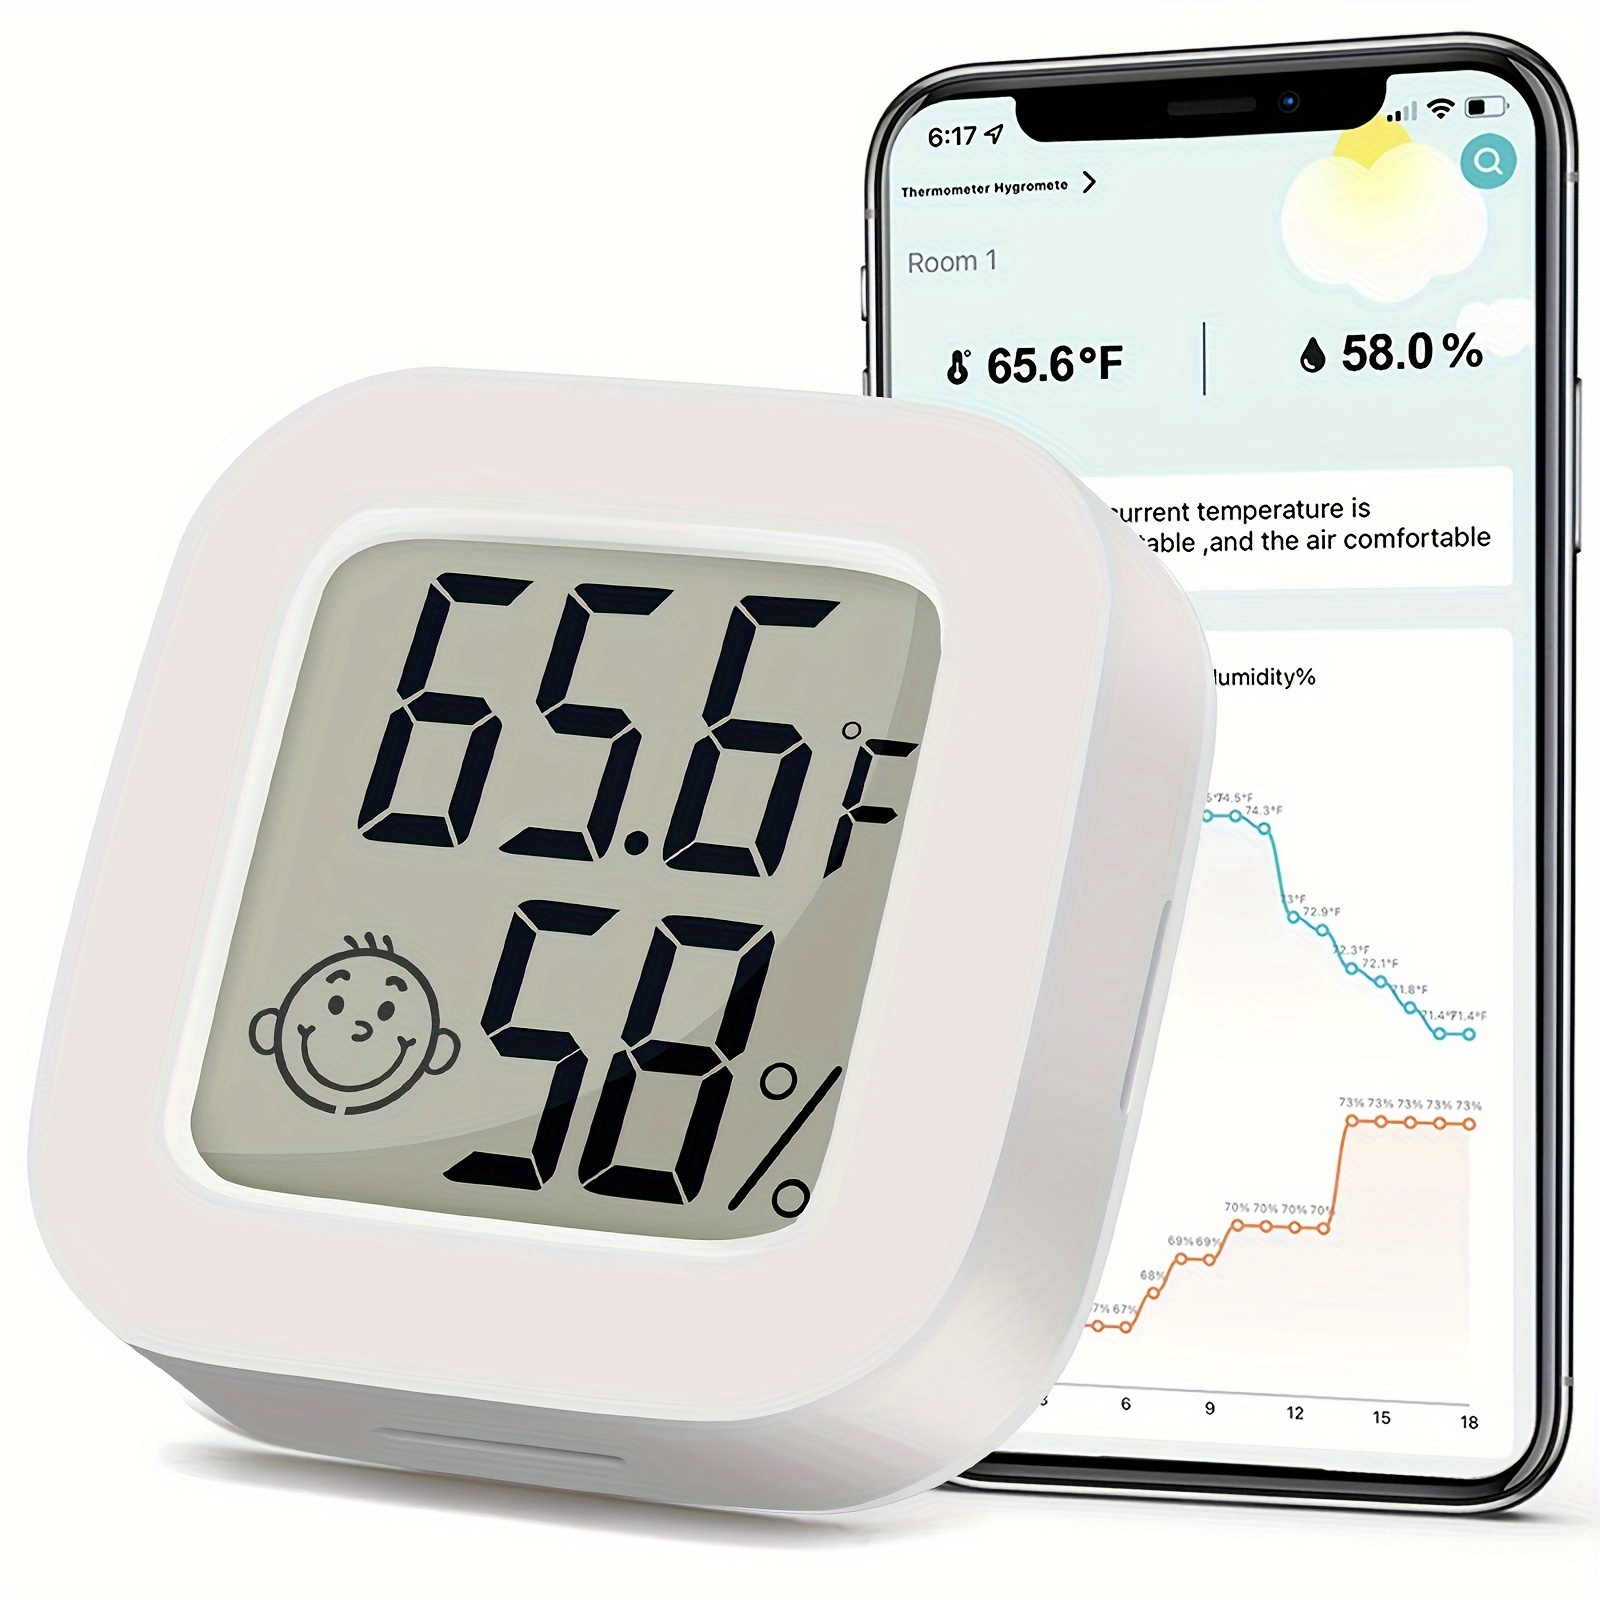 Bt Hygrometer Thermometer, Smart Humidity Meter With Remote App